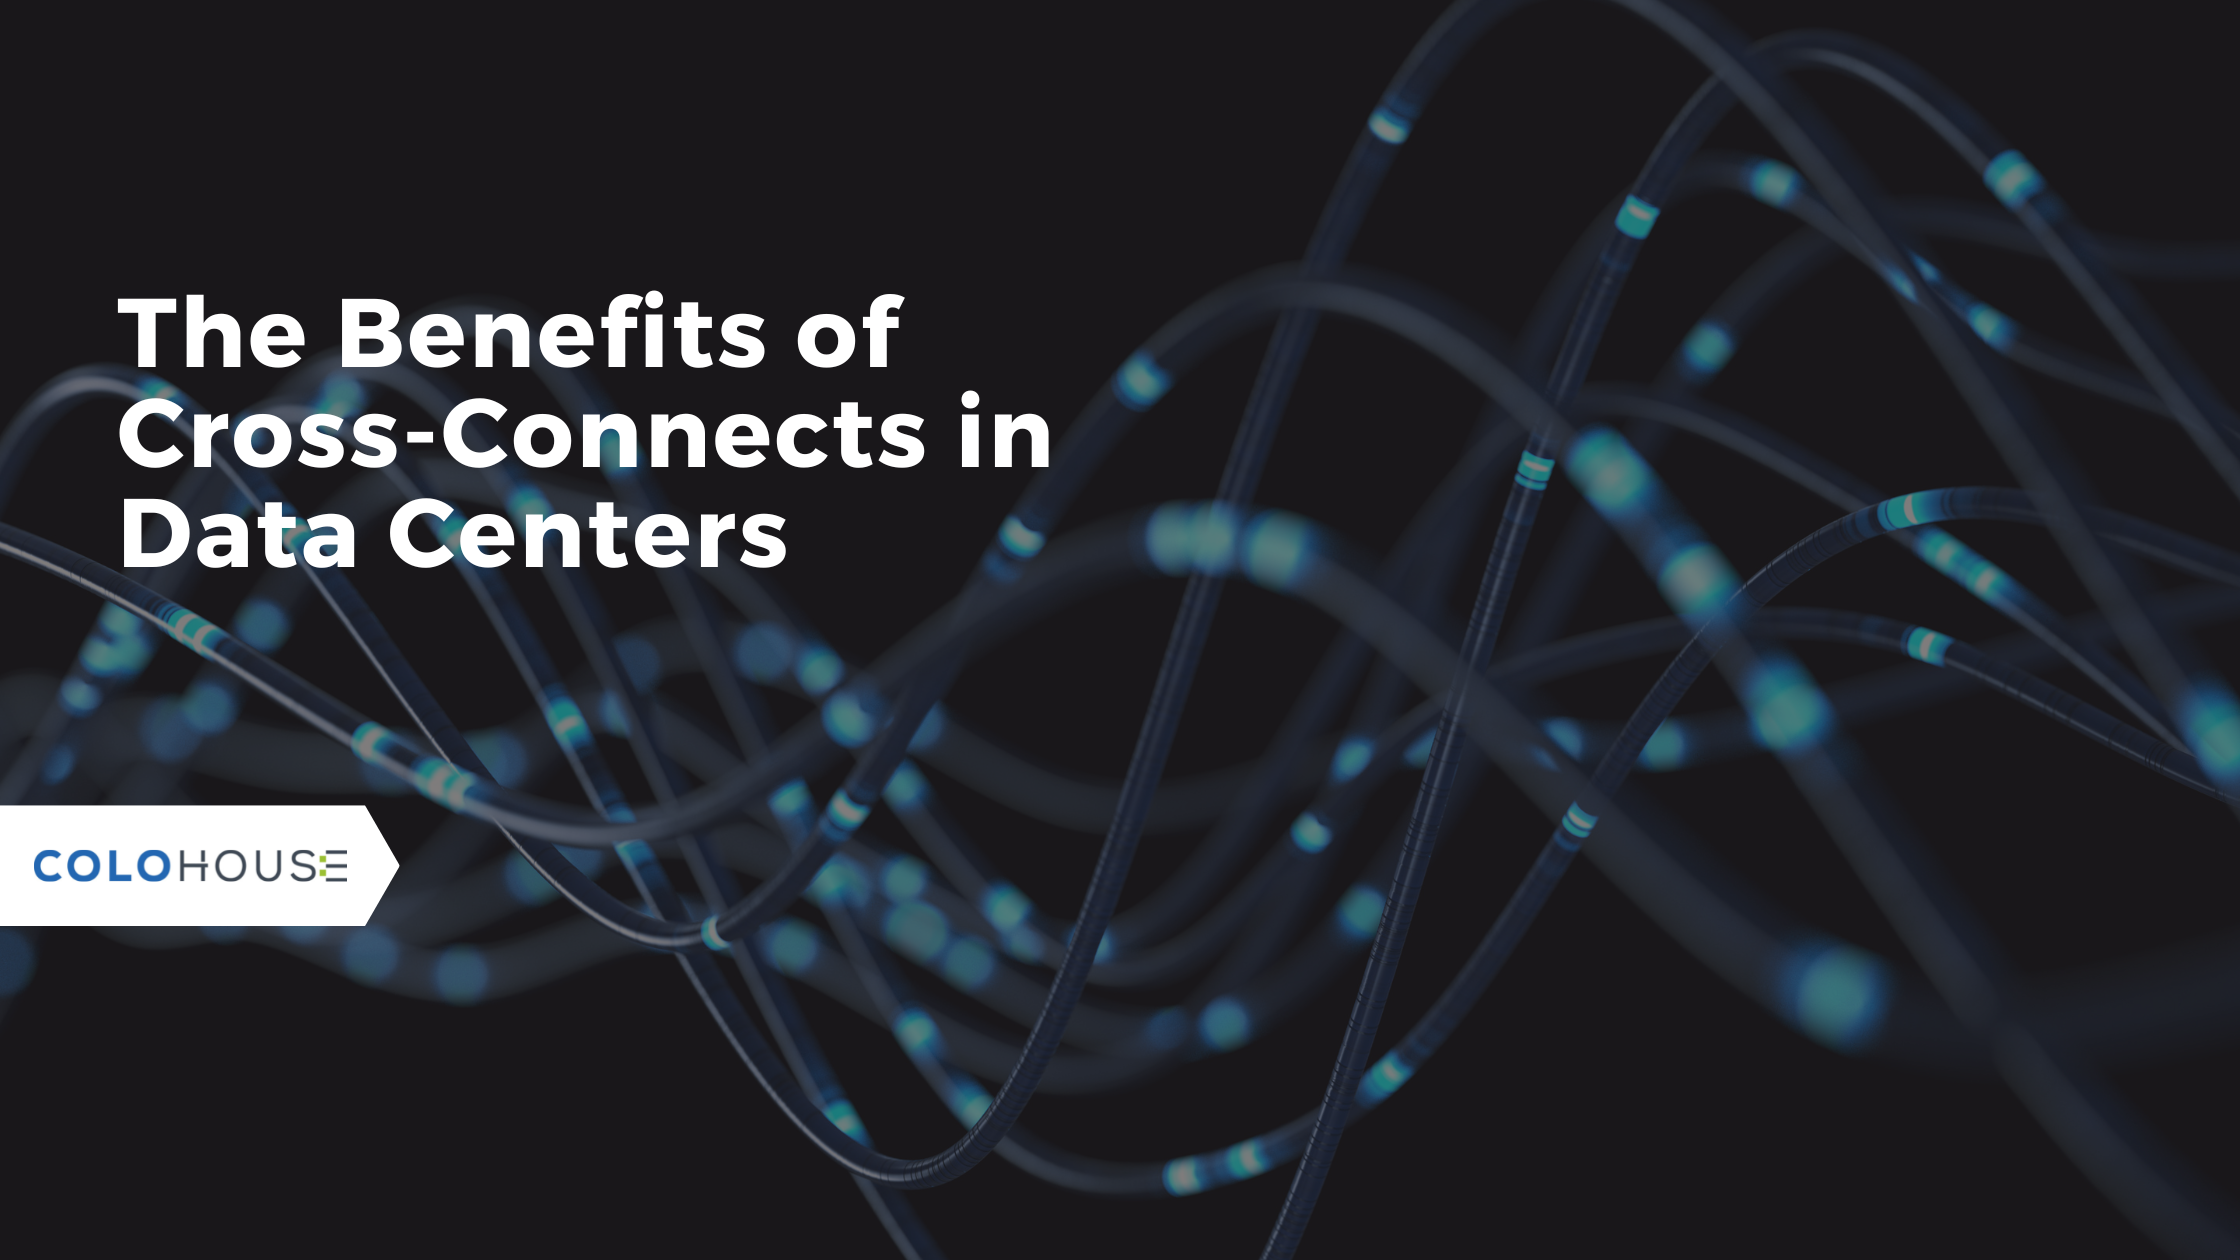 The Benefits of Cross-Connects in Data Centers